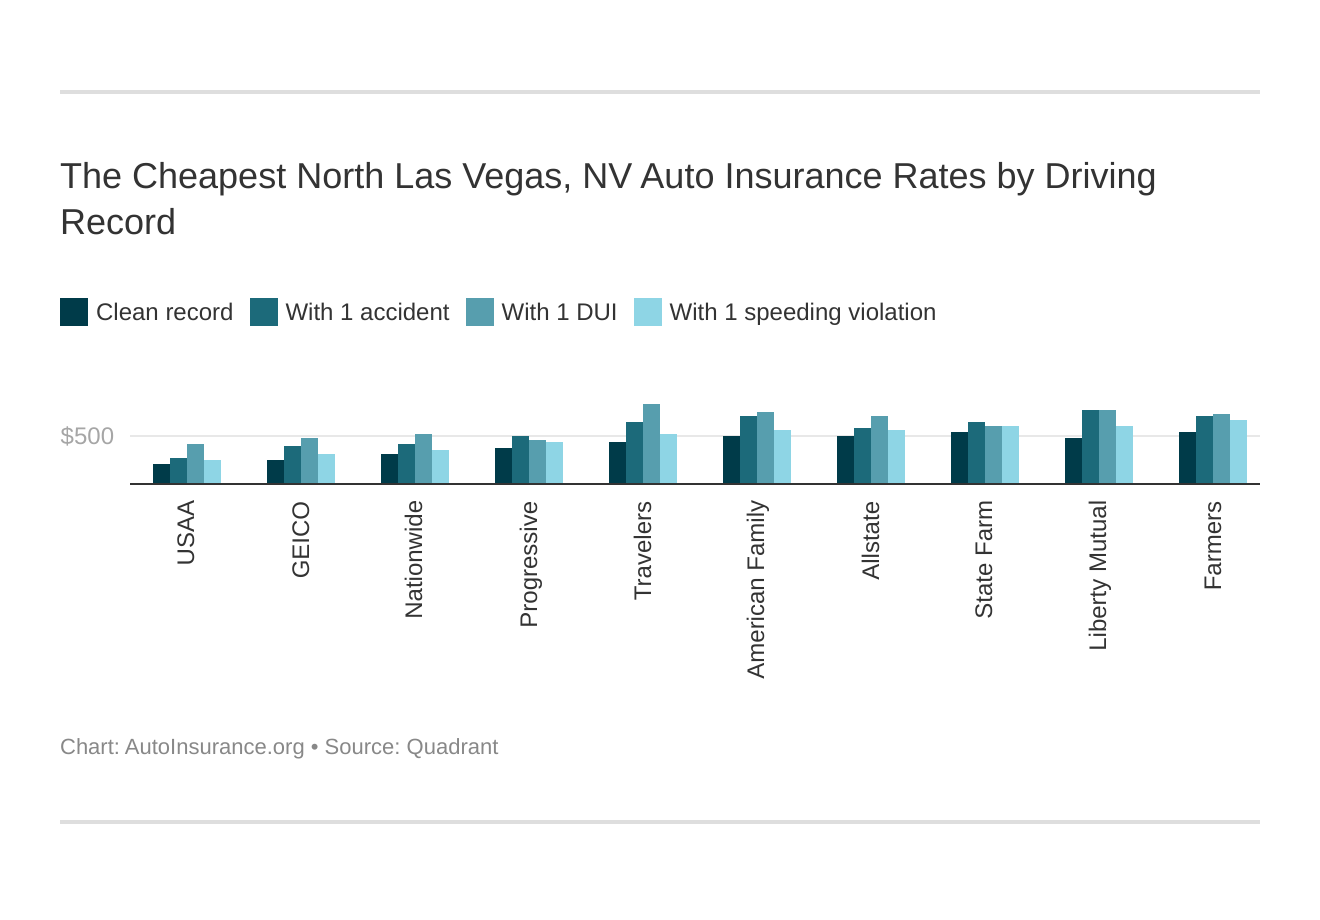 The Cheapest North Las Vegas, NV Auto Insurance Rates by Driving Record